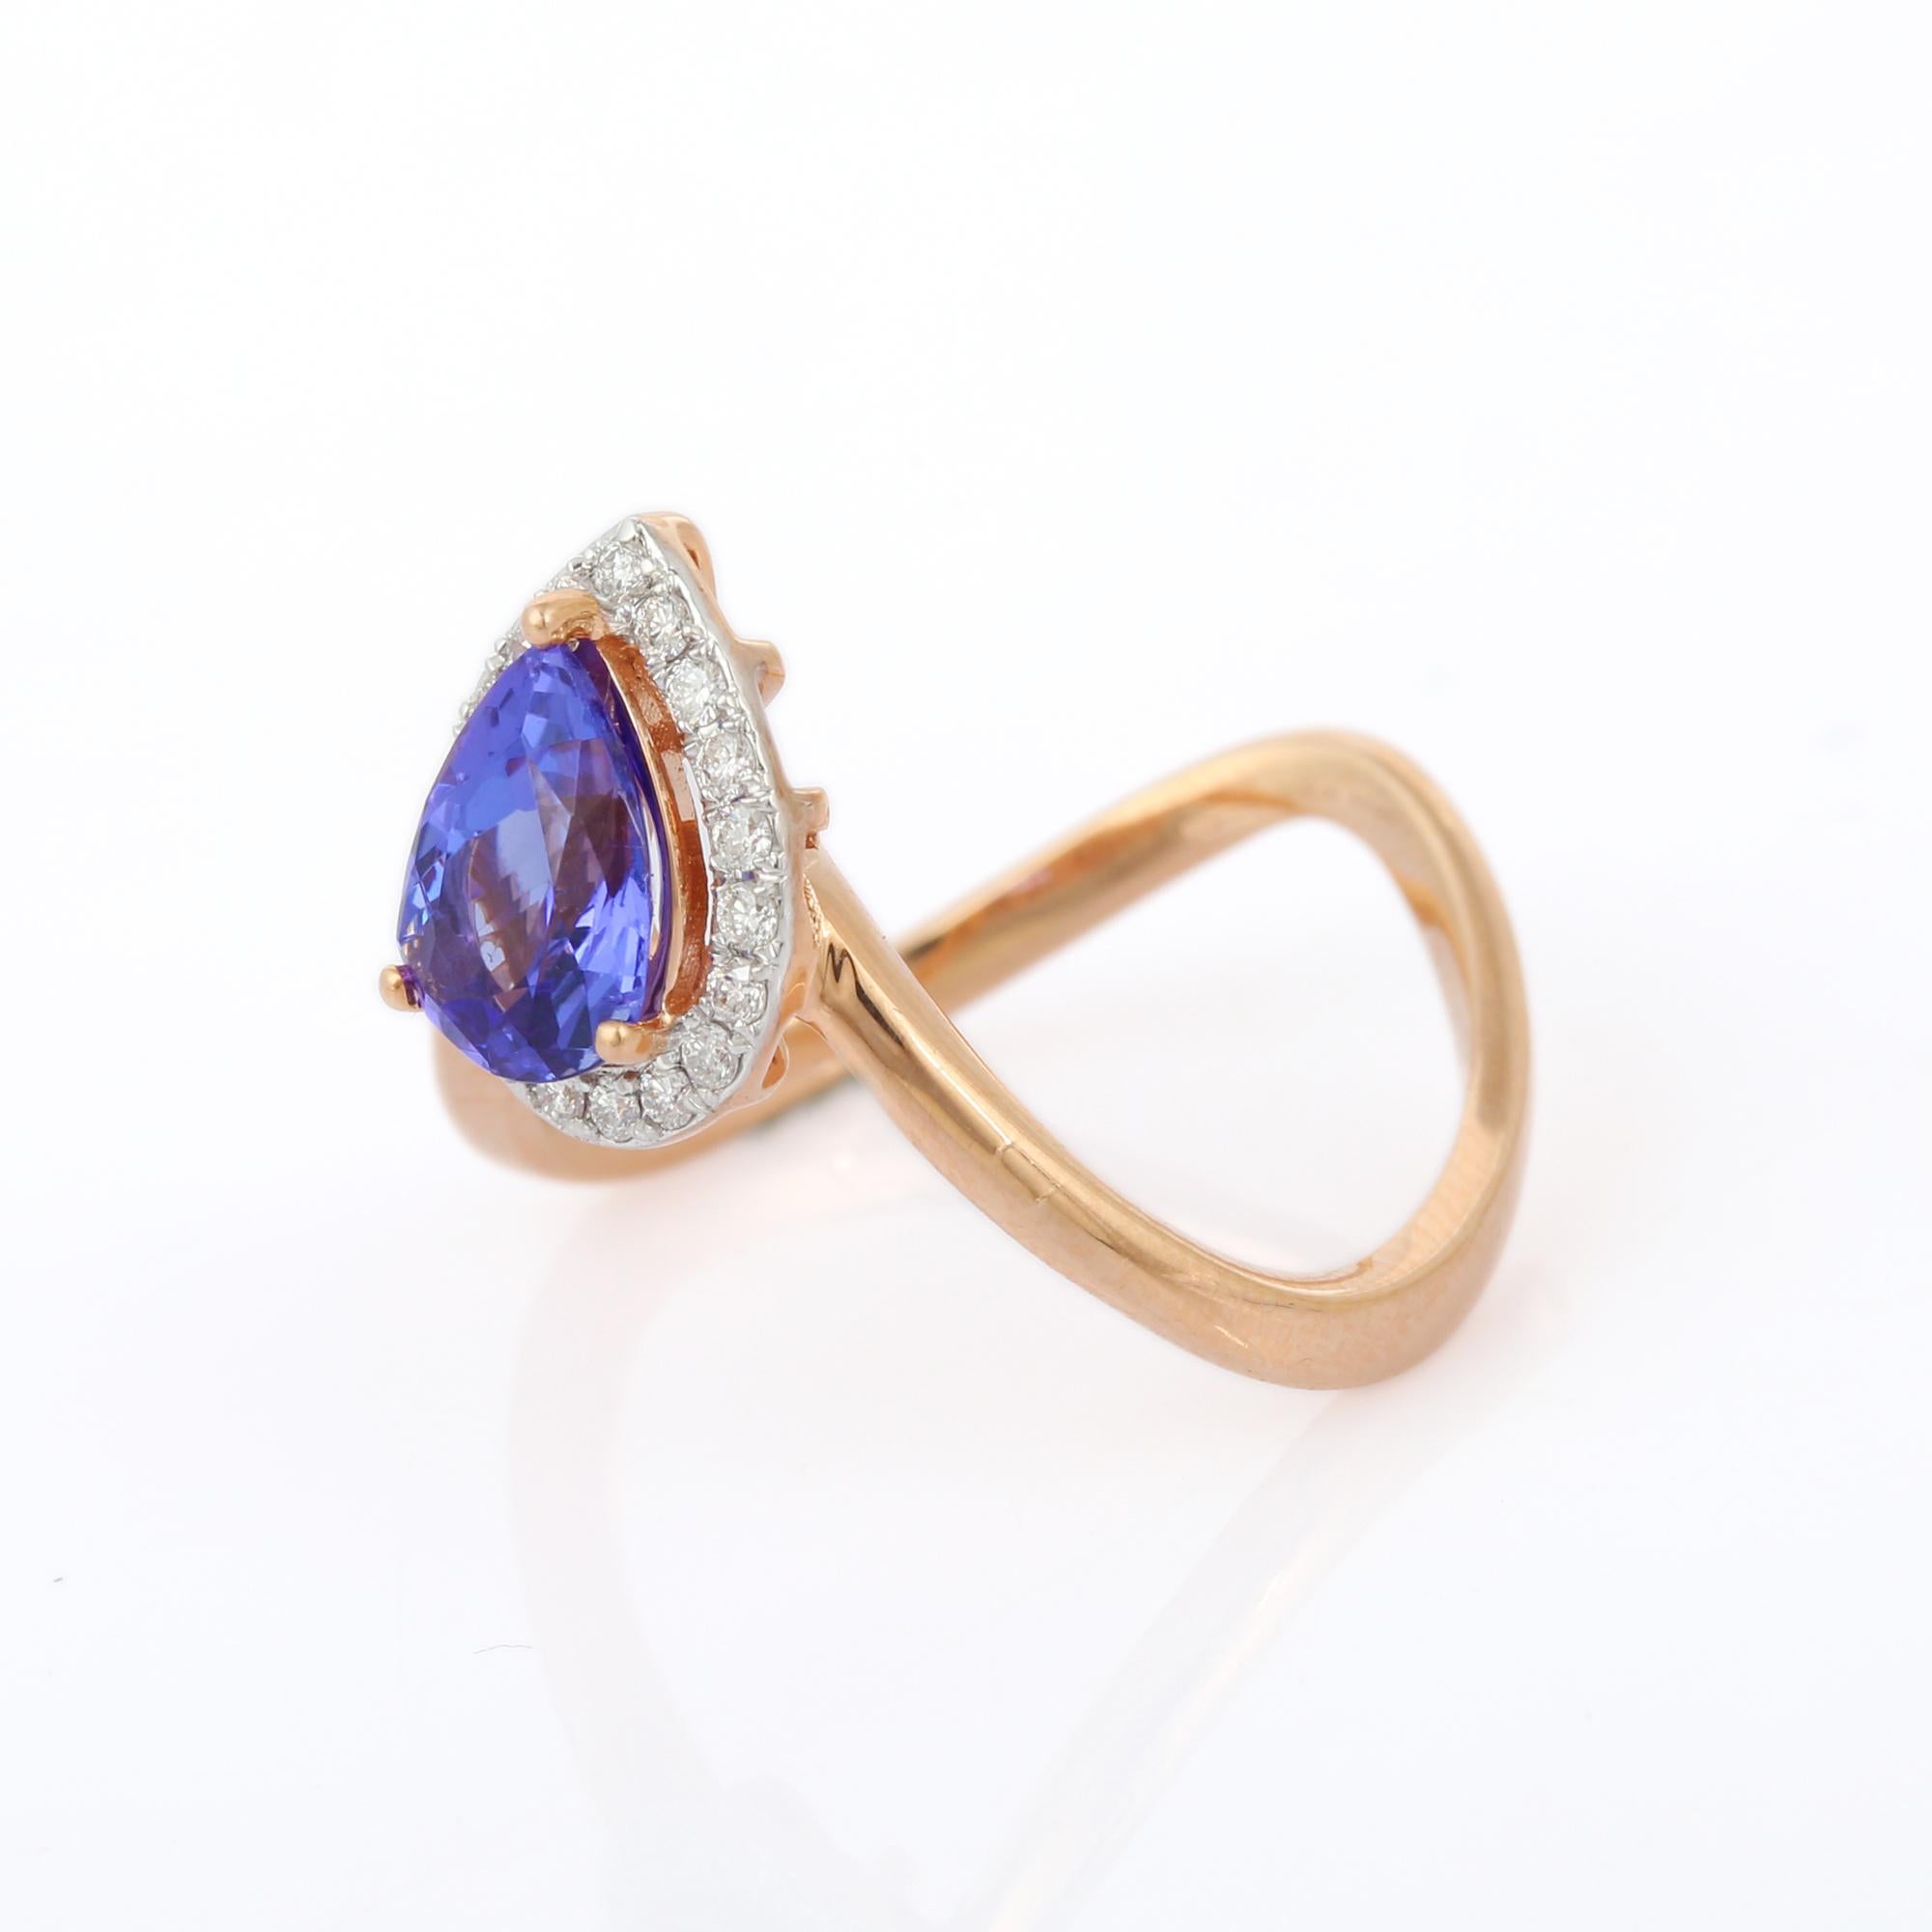 For Sale:  18K Rose Gold Pear Shape Tanzanite and Diamond Ring  3